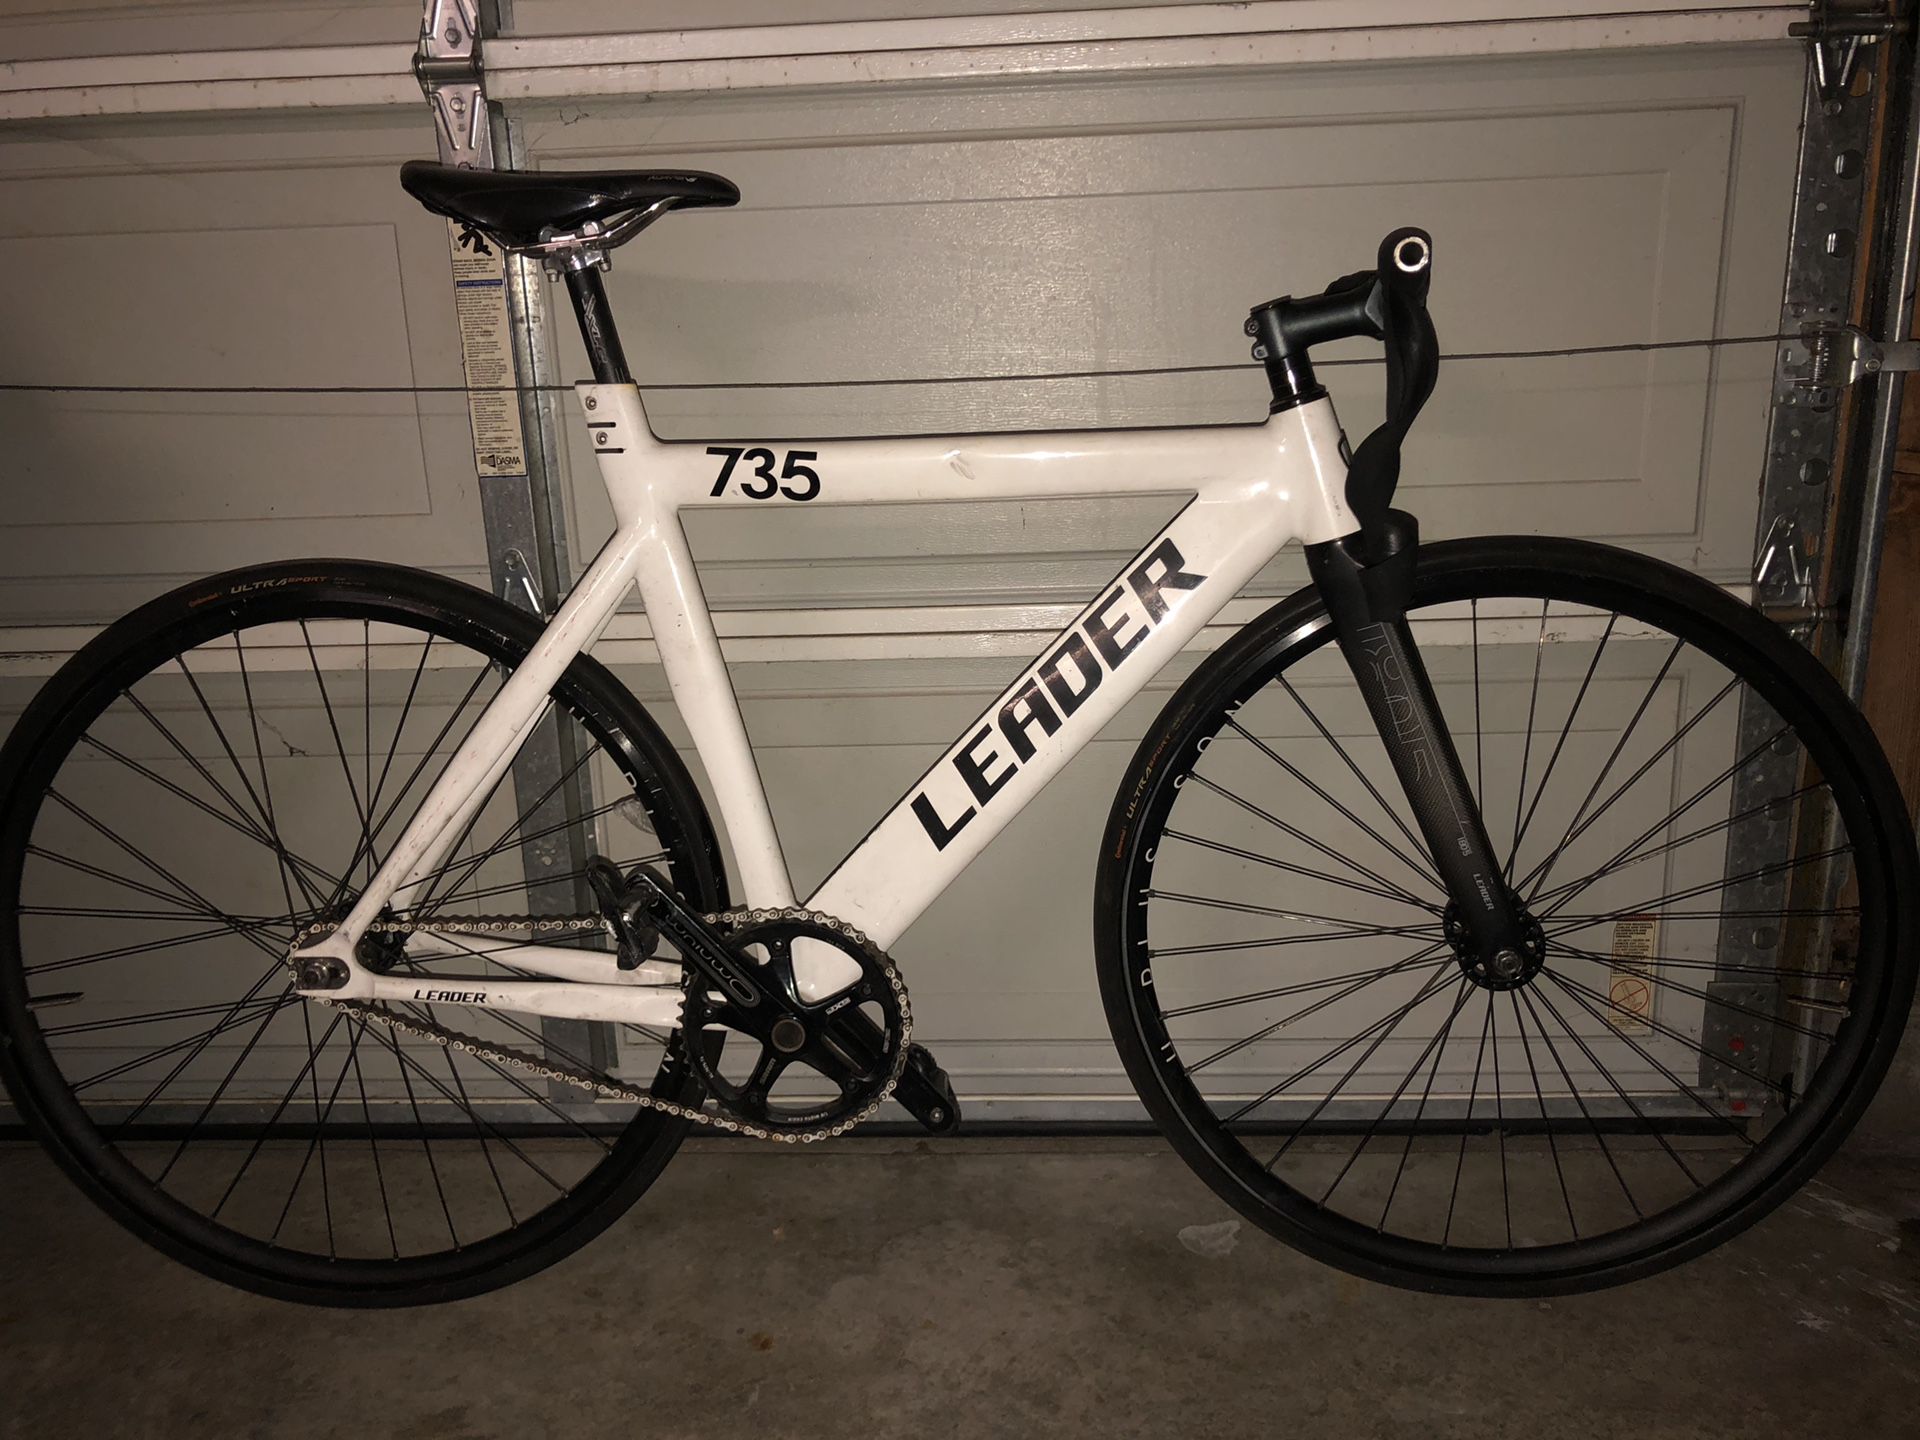 Leader 735 fixed gear track bike fixie for Sale in Palmdale, CA